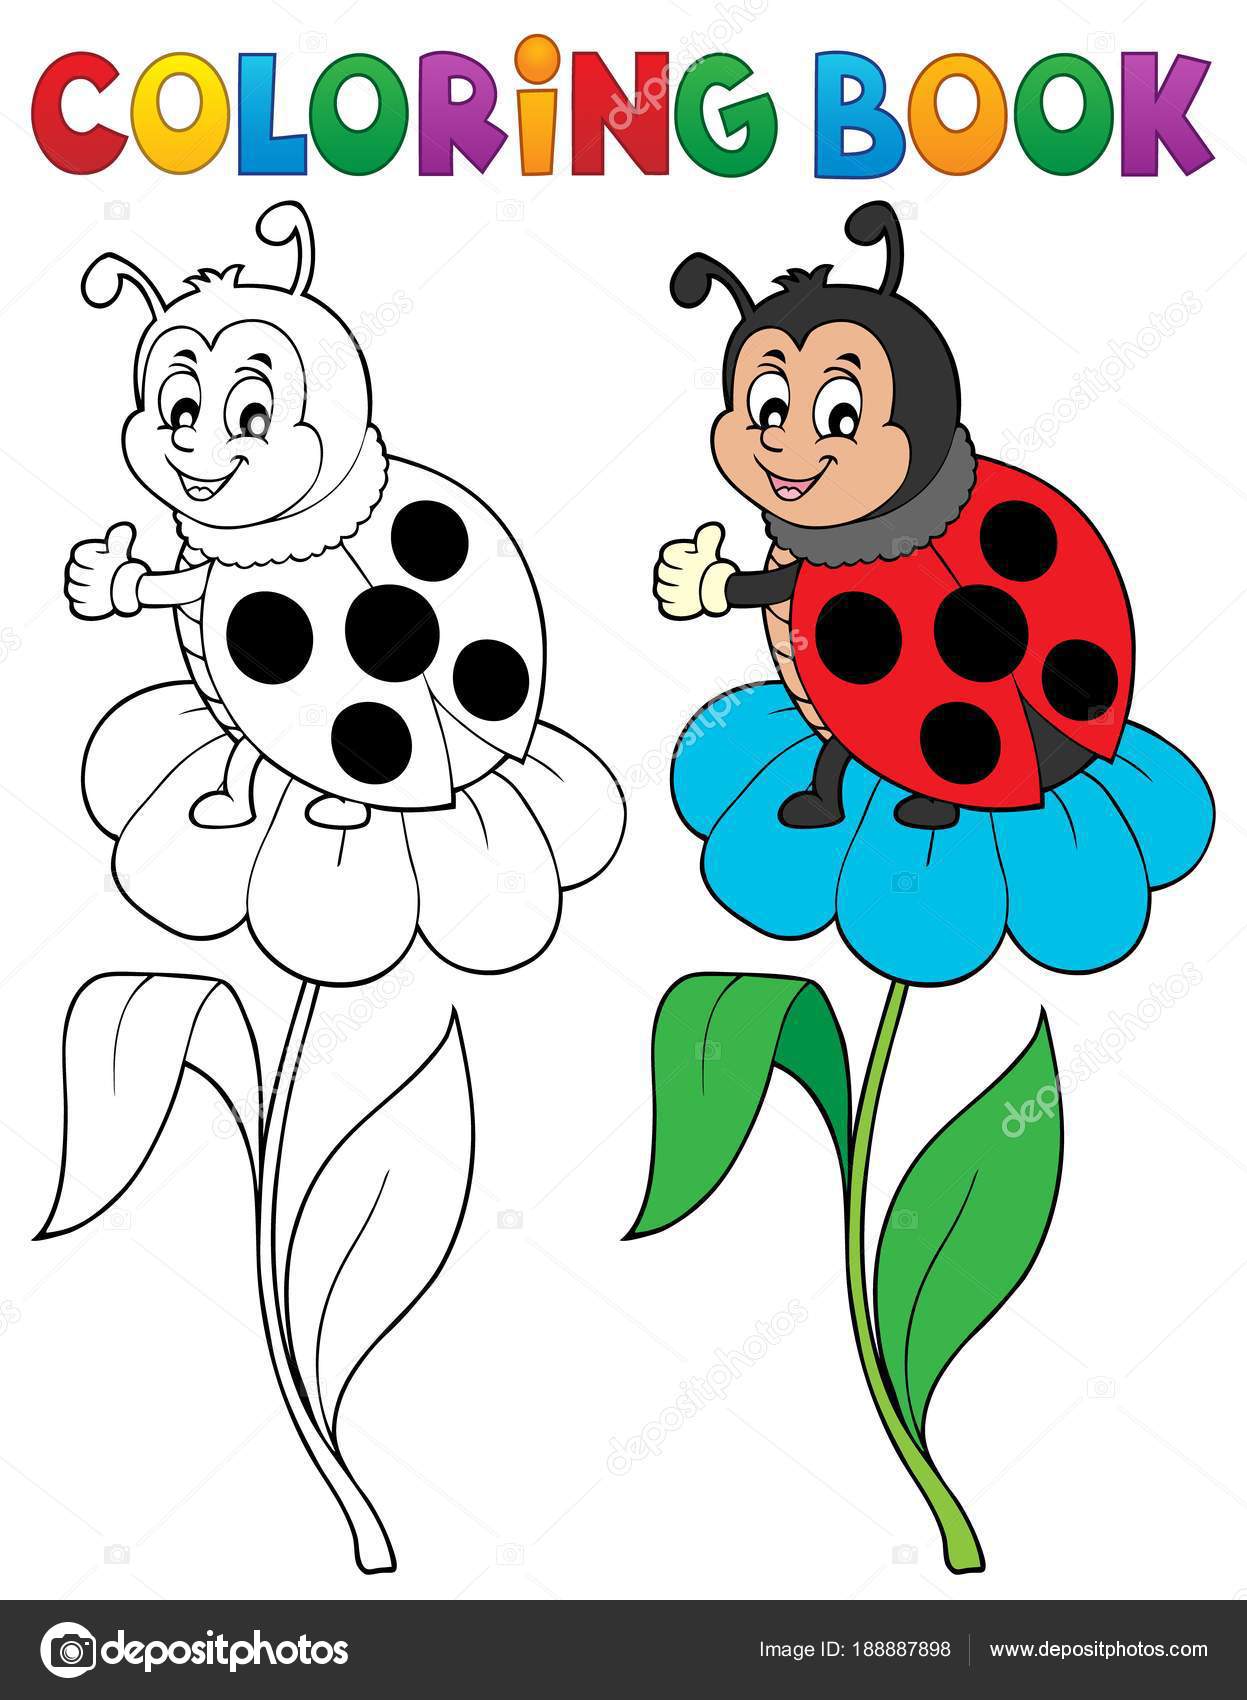 Download Coloring Book Ladybug Theme 6 Vector Image By C Clairev Vector Stock 188887898